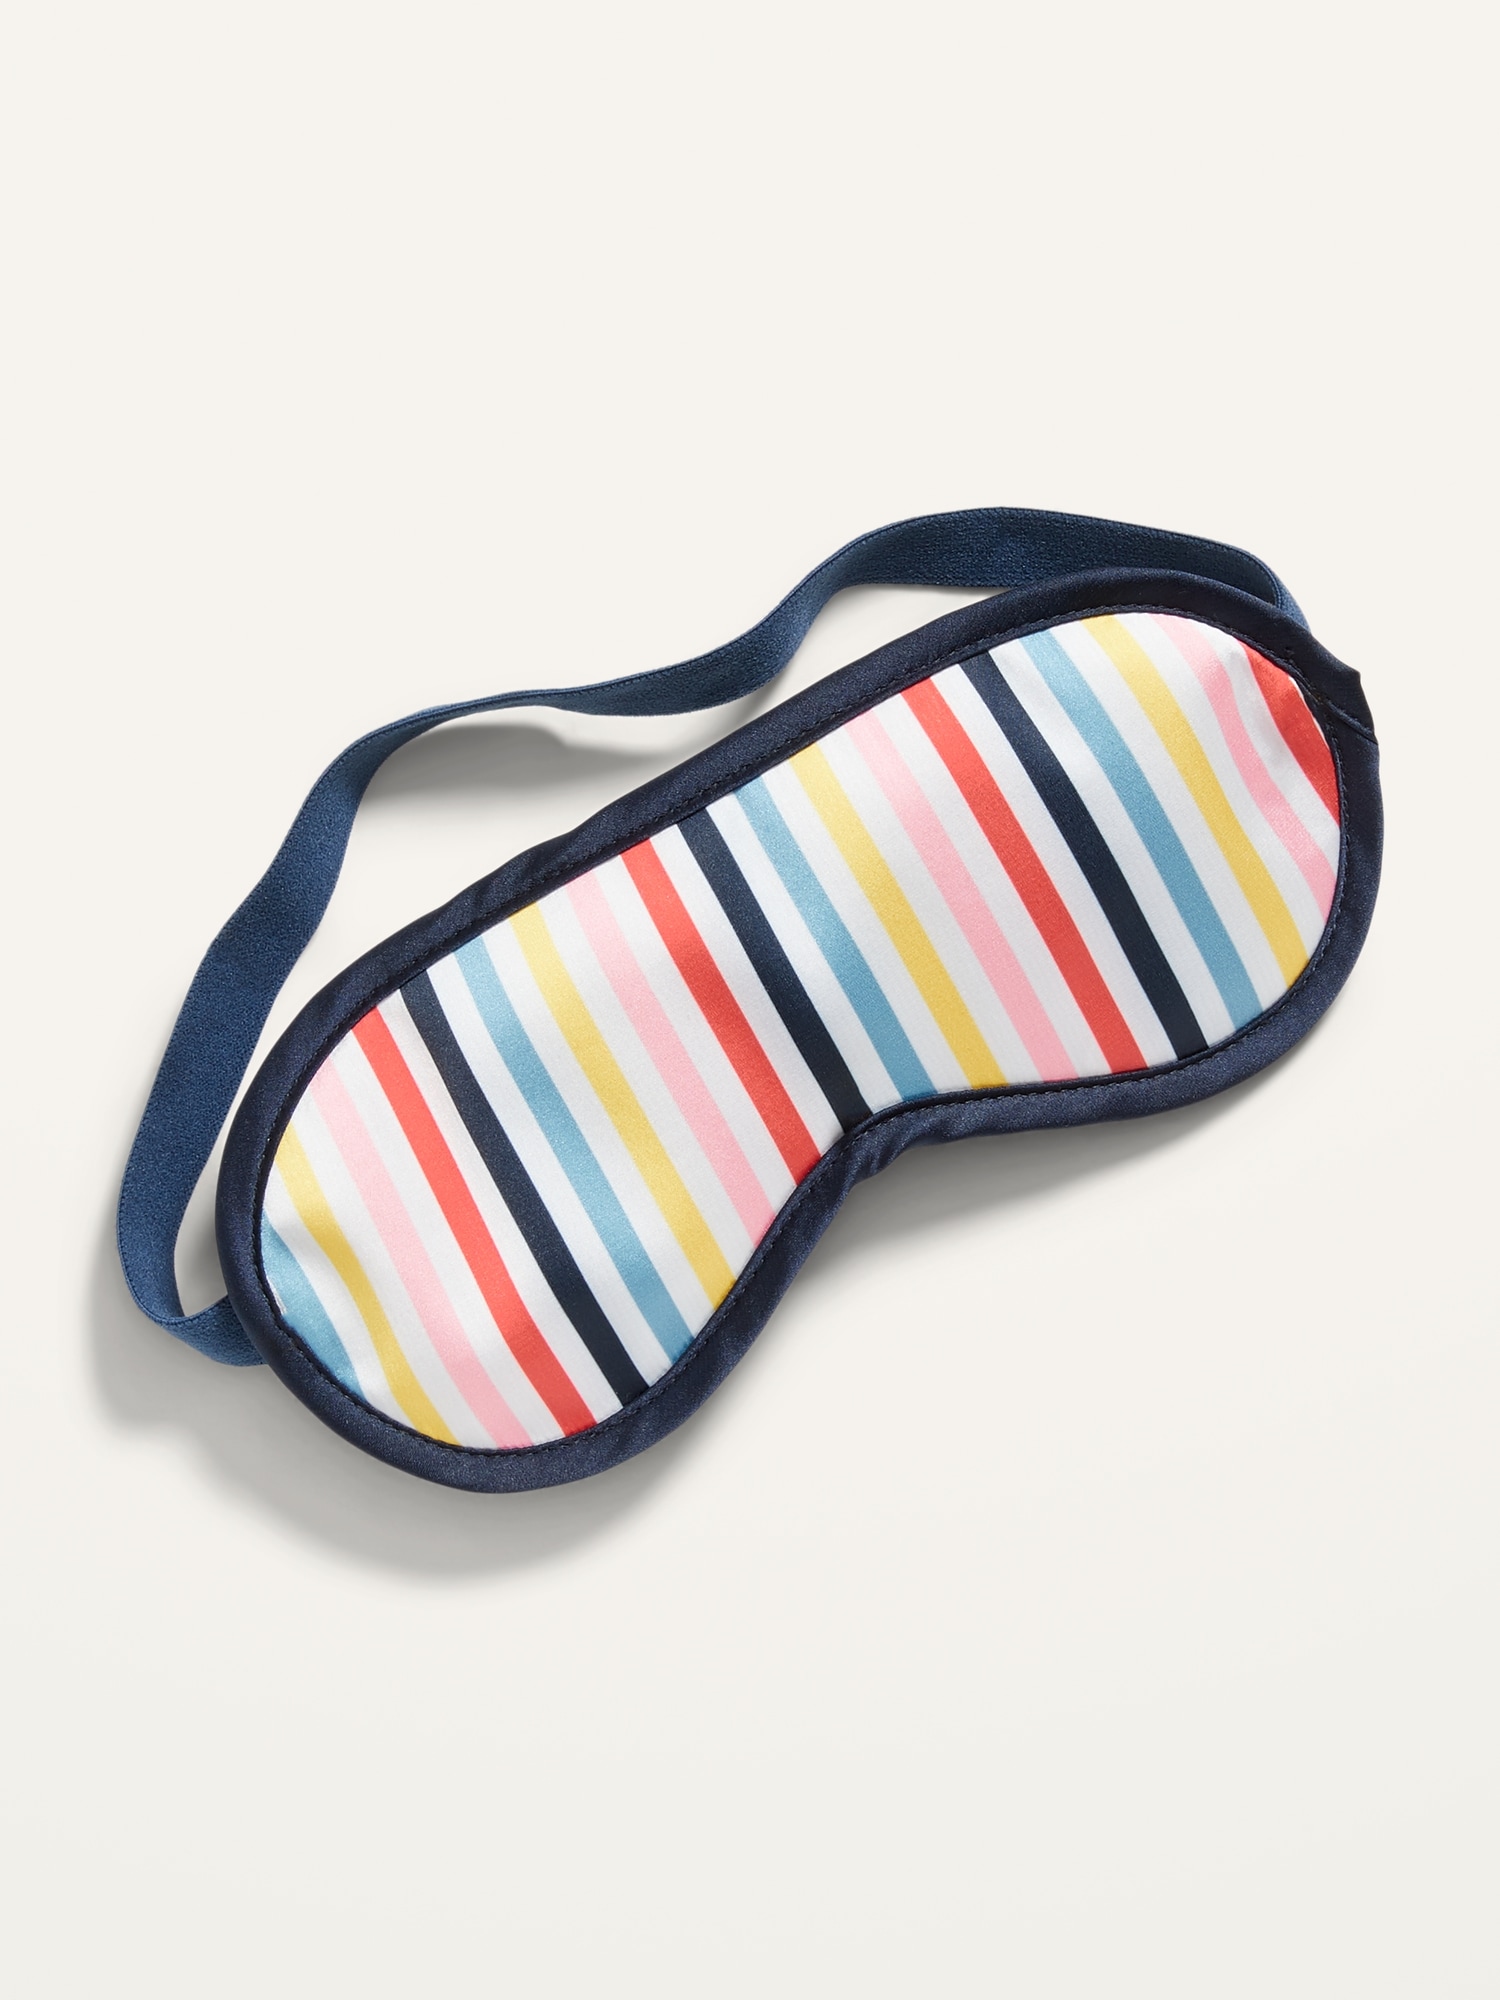 Old Navy Patterned Satin Sleep Mask for Adults multi. 1